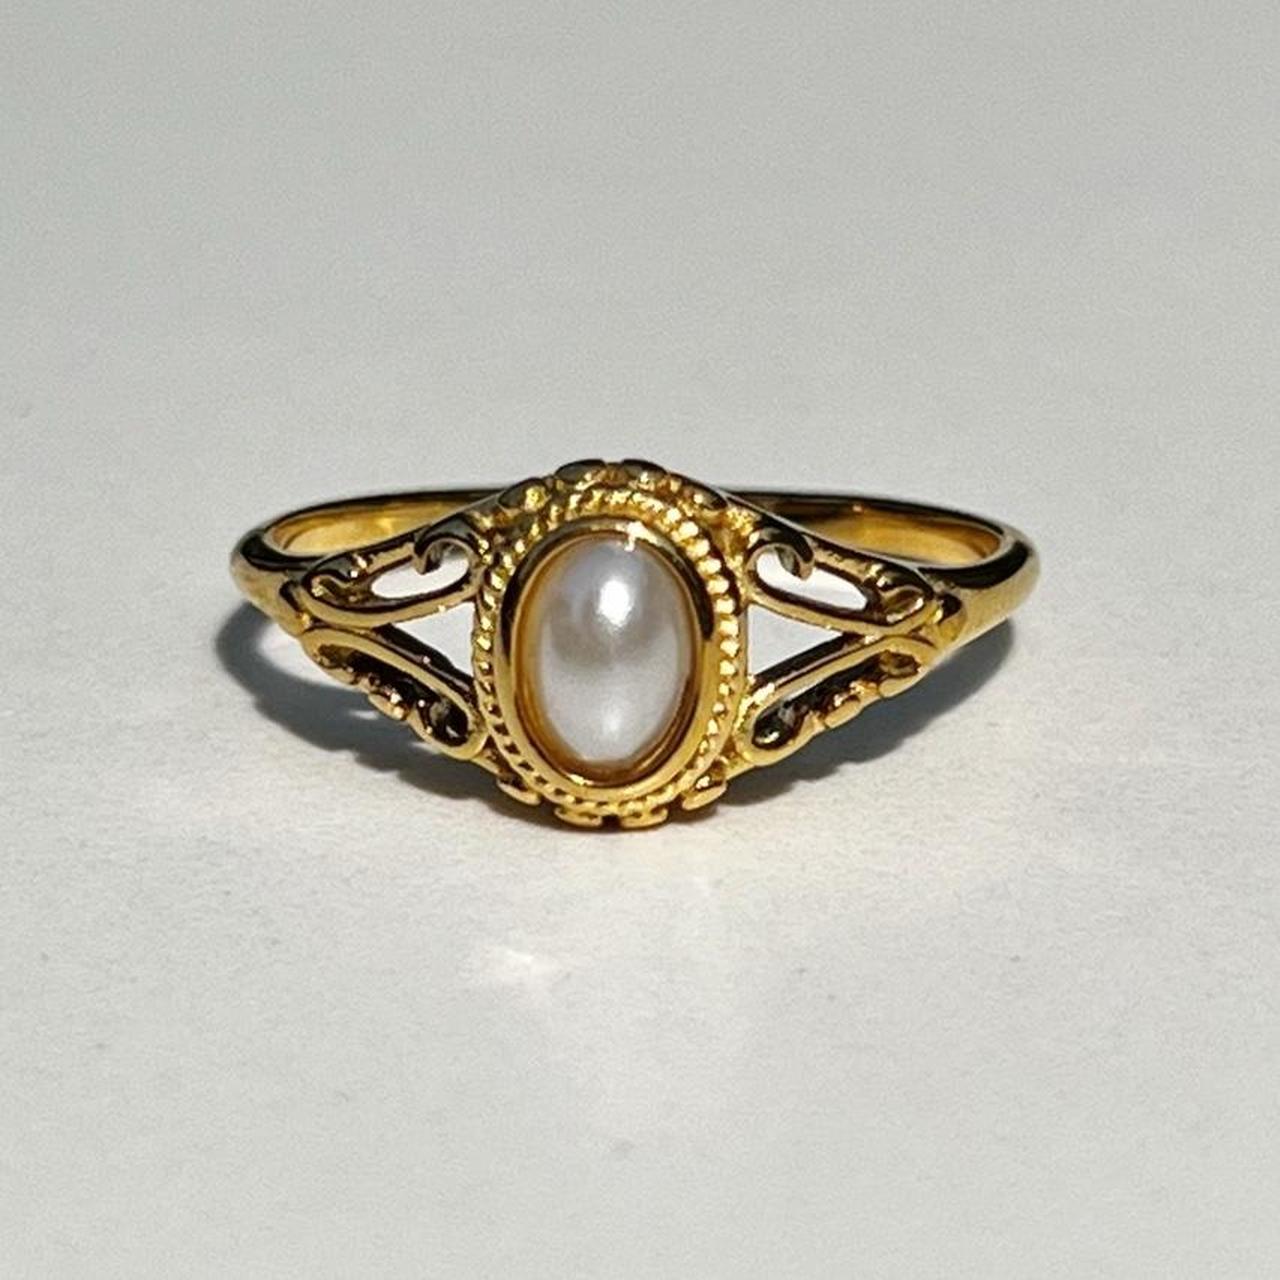 New! “Genovia” Gold Pearl Ring Made with stainless... - Depop